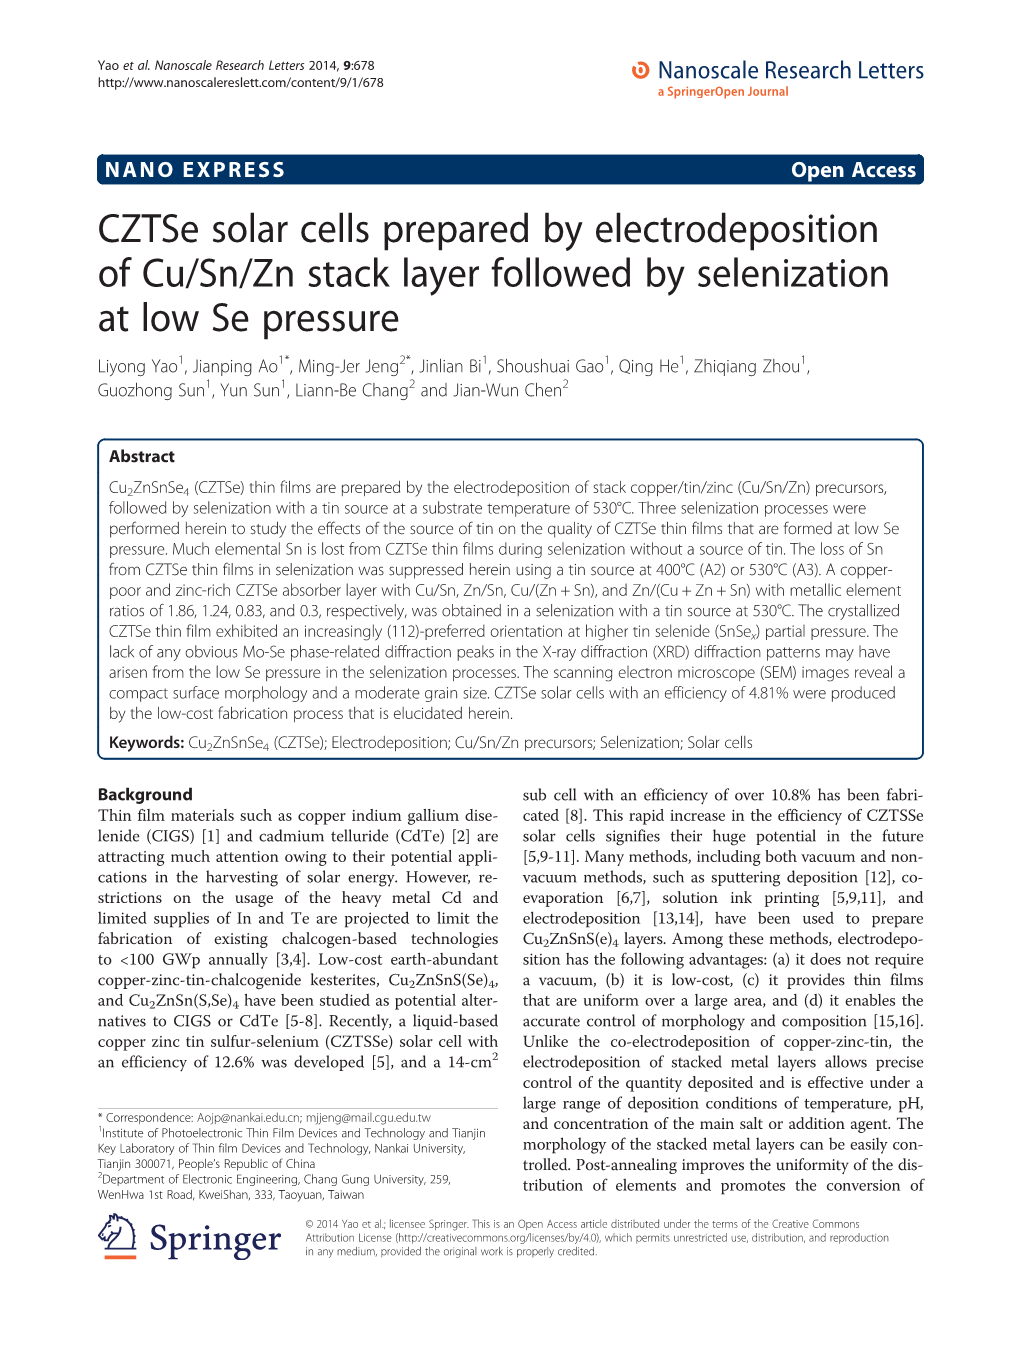 Cztse Solar Cells Prepared by Electrodeposition of Cu/Sn/Zn Stack Layer Followed by Selenization at Low Se Pressure